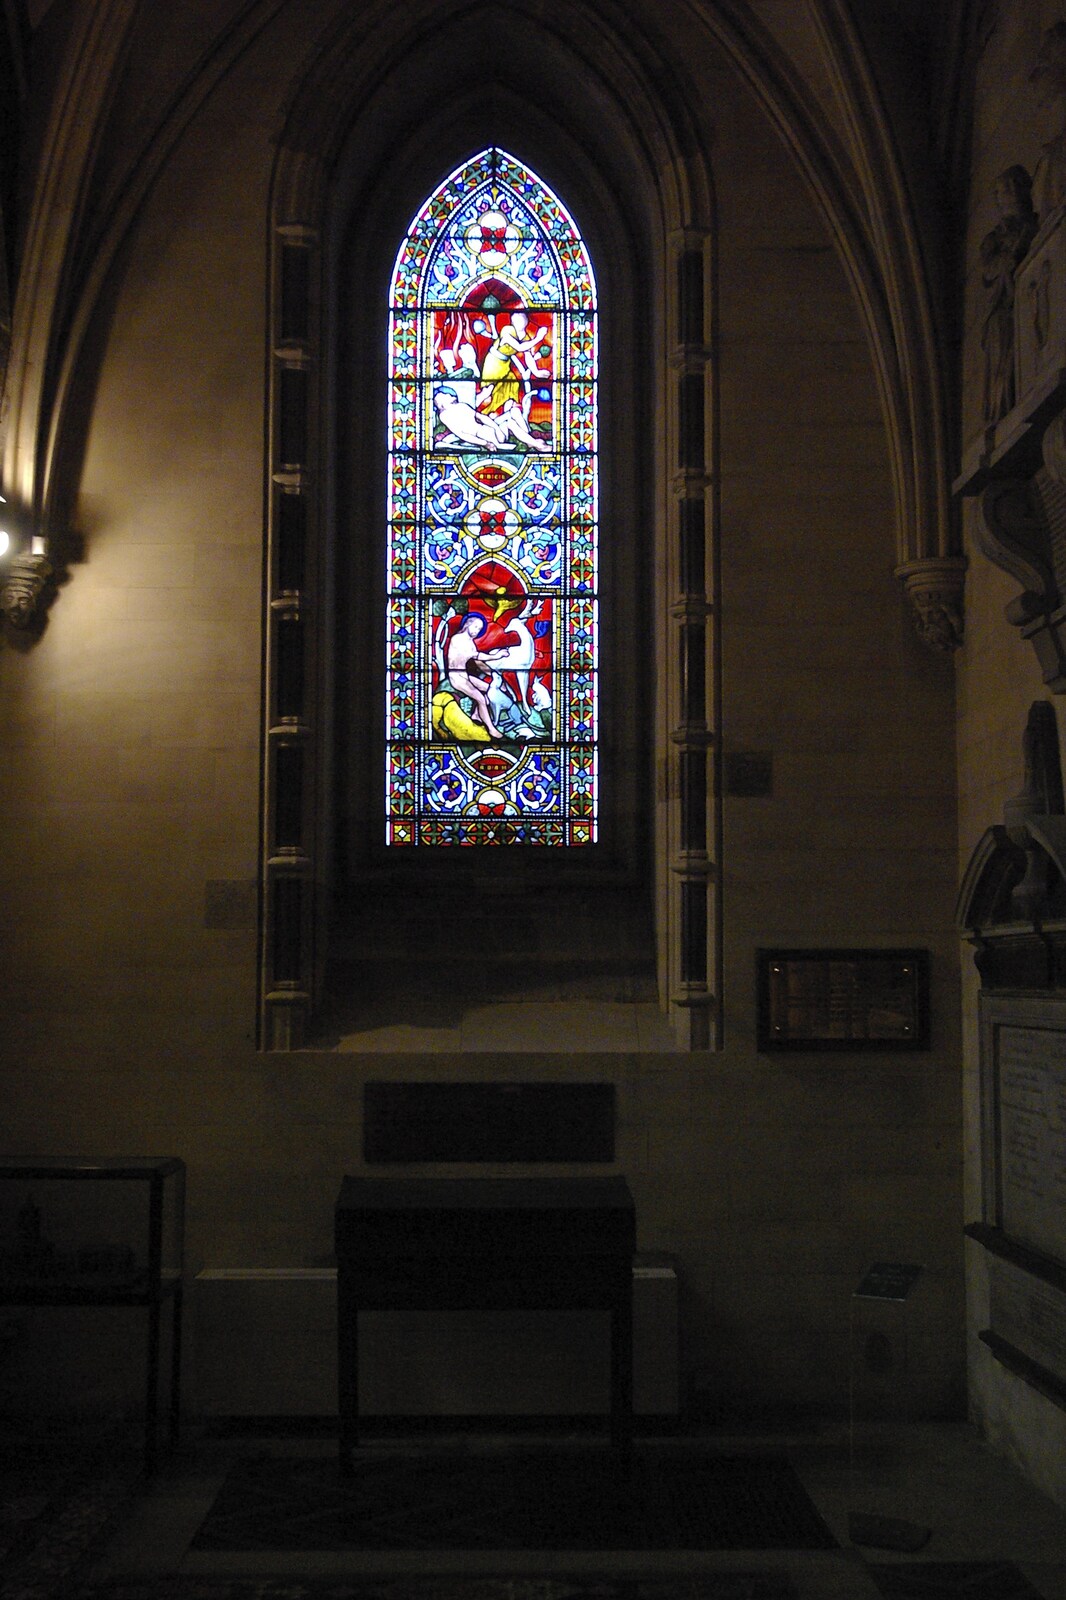 Stained glass window from Blackrock and Dublin, Ireland - 24th September 2007